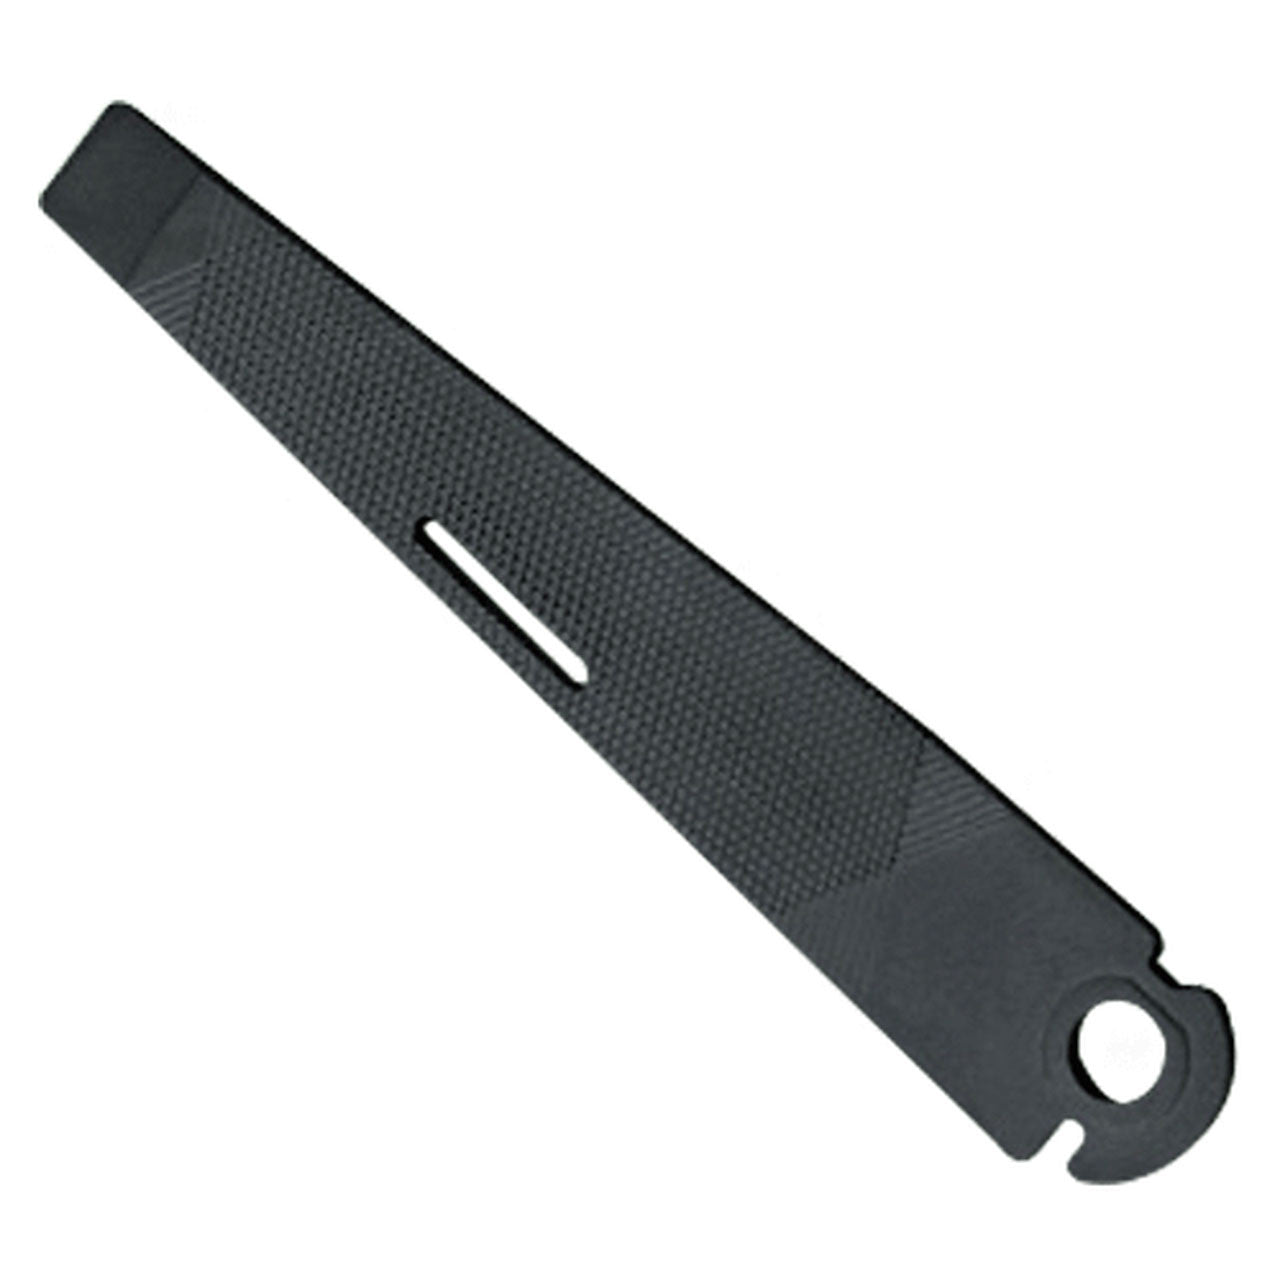 3-Sided File with Screwdriver Tip